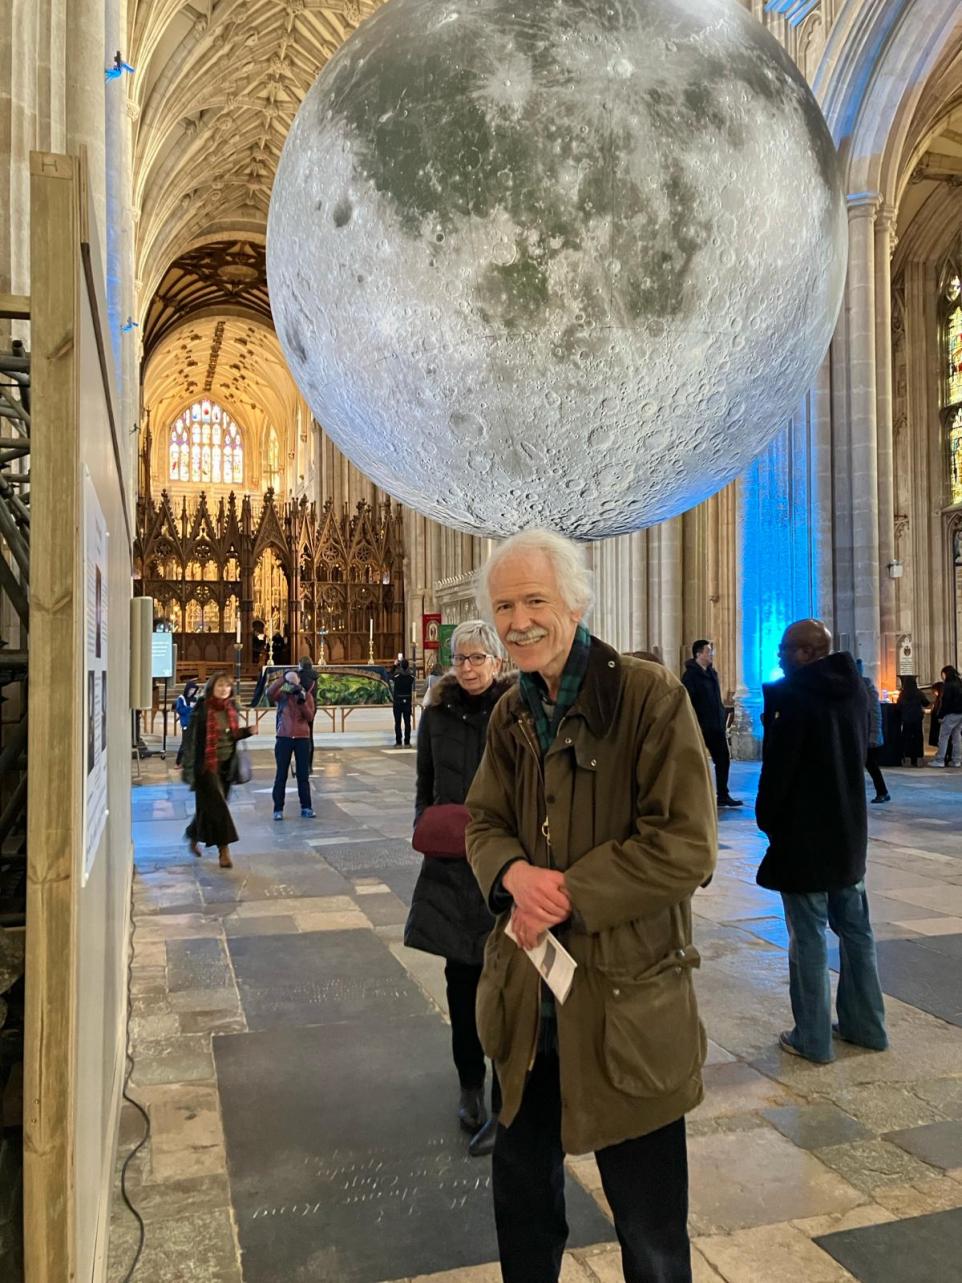 moon comes to winchester - and hundreds of people flock to see it in the cathedral